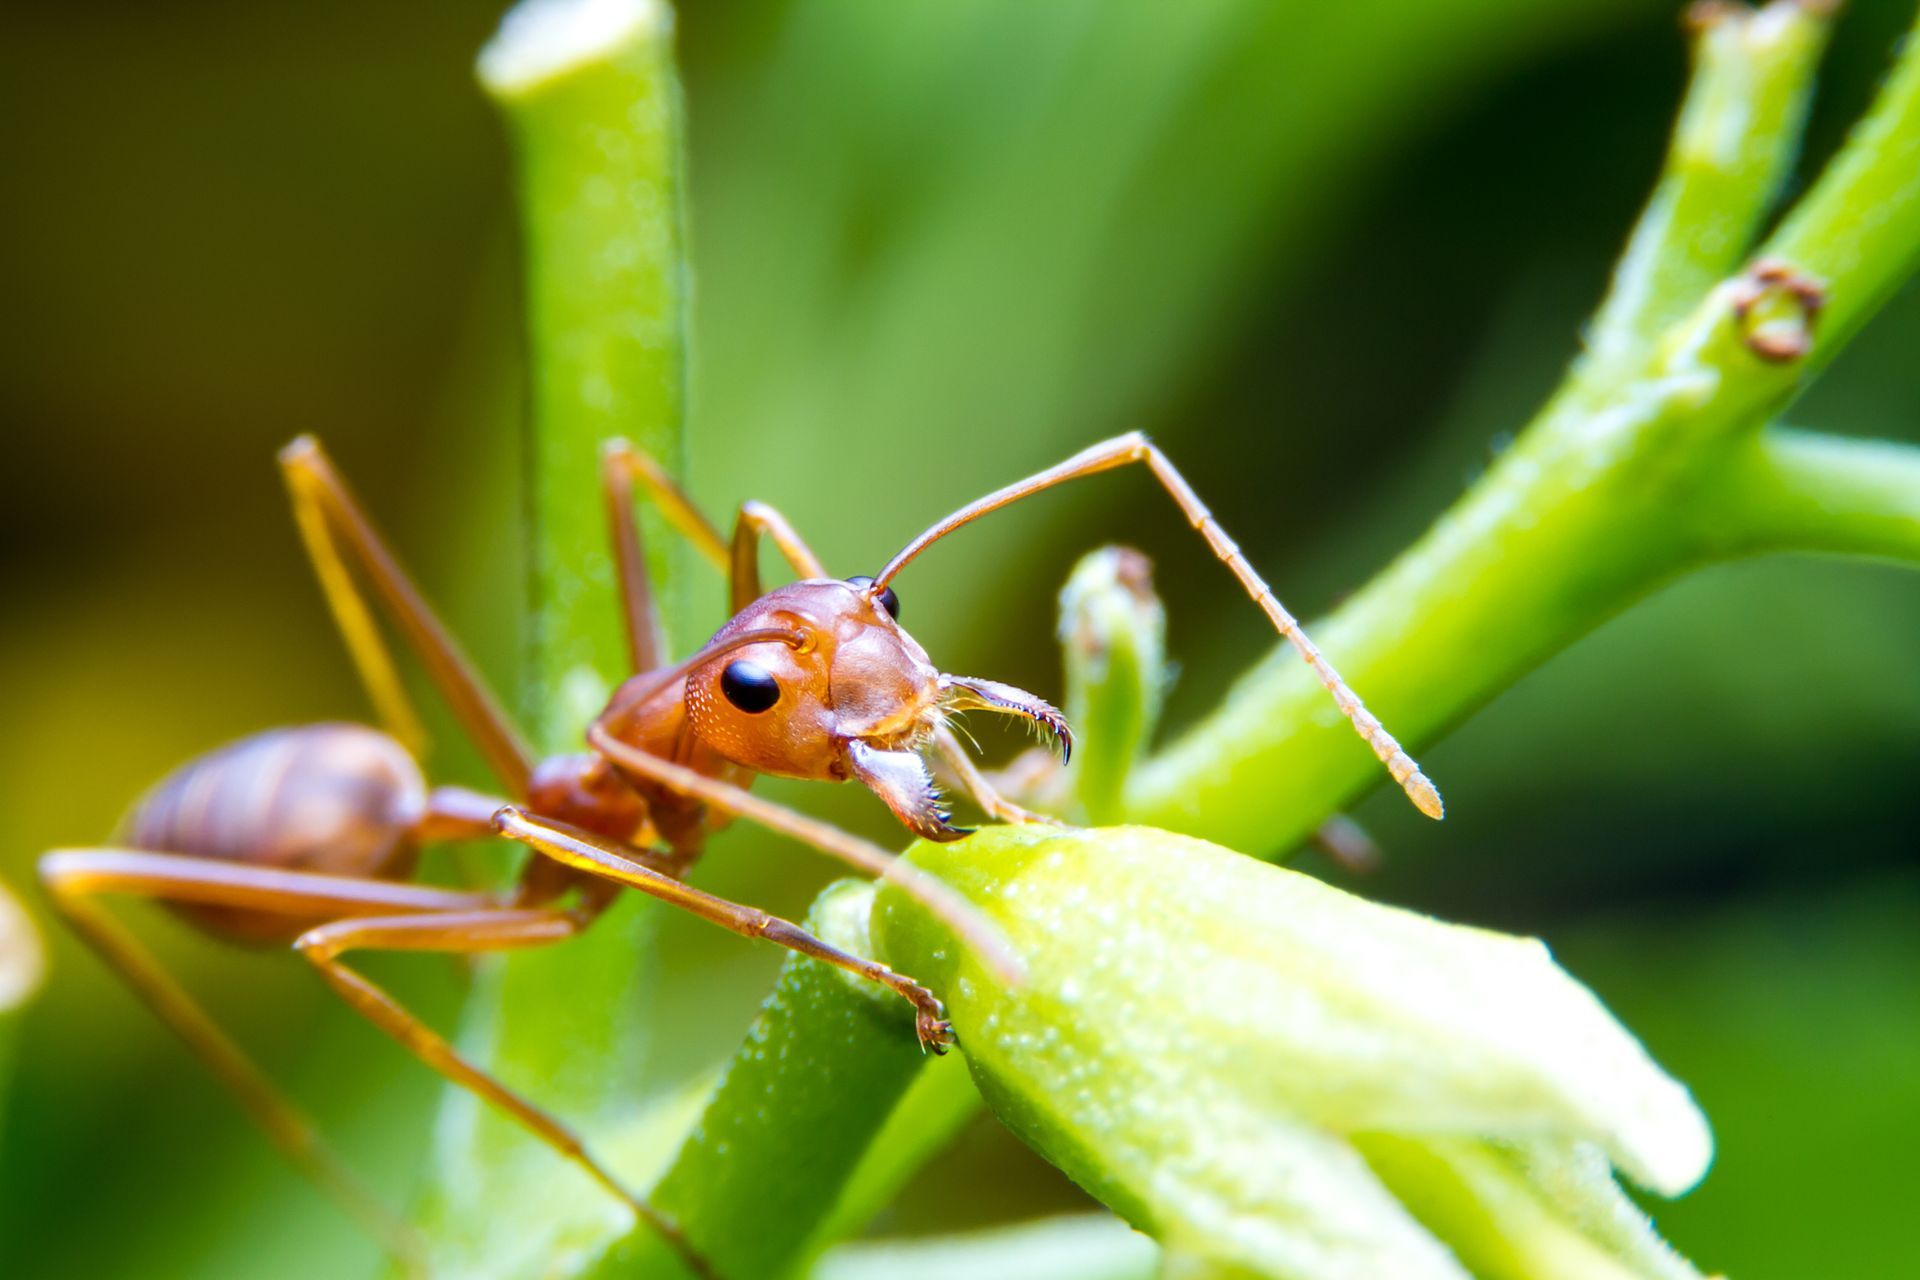 Close up of a fire ant resting on a plant